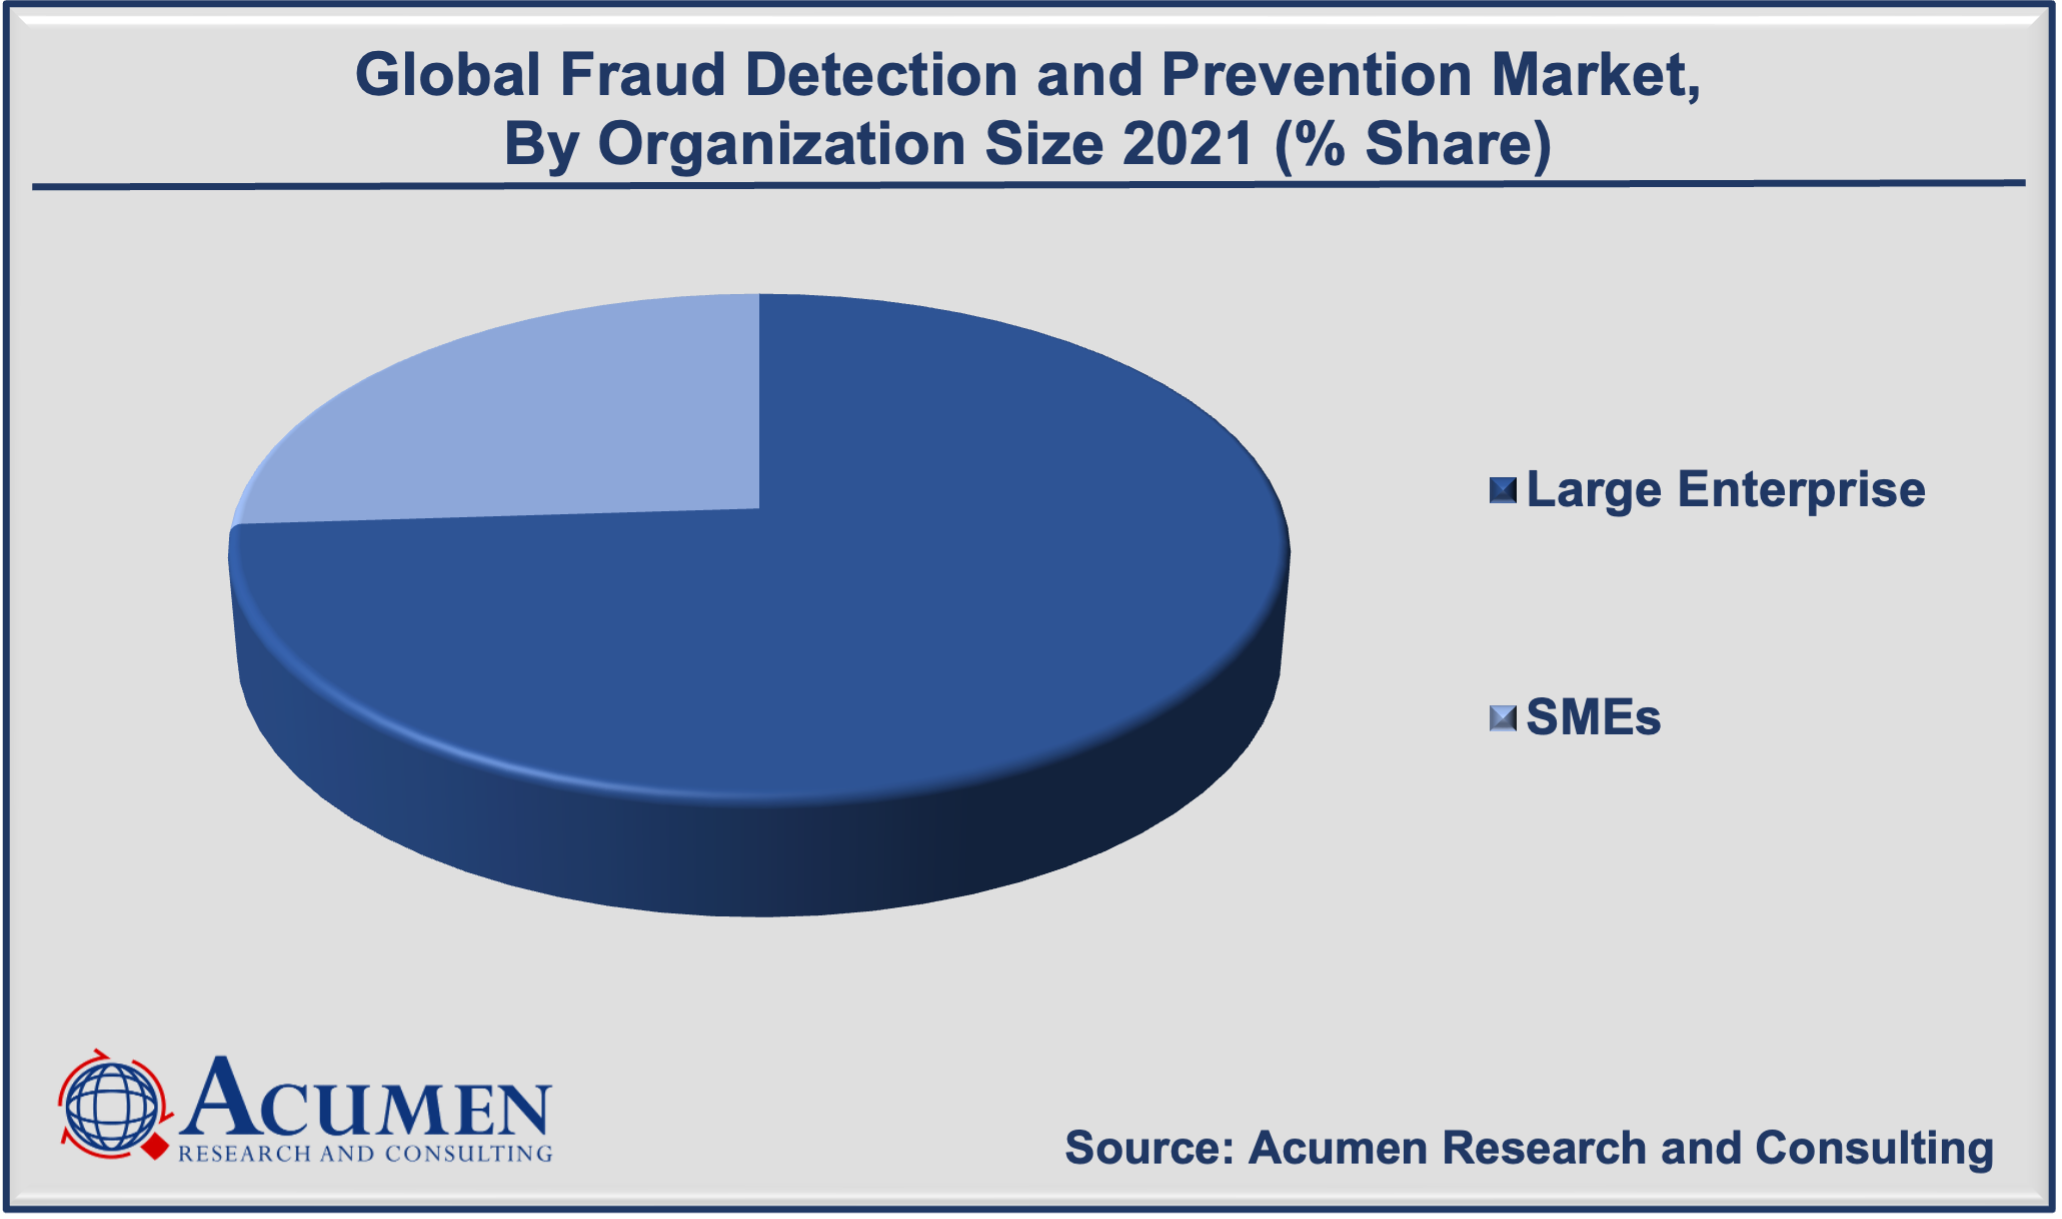 Fraud Detection and Prevention Market Size accounted for USD 27 Billion in 2021 and is projected to reach USD 176 Billion by 2030, with a significant CAGR of 23.4% from 2022 to 2030.